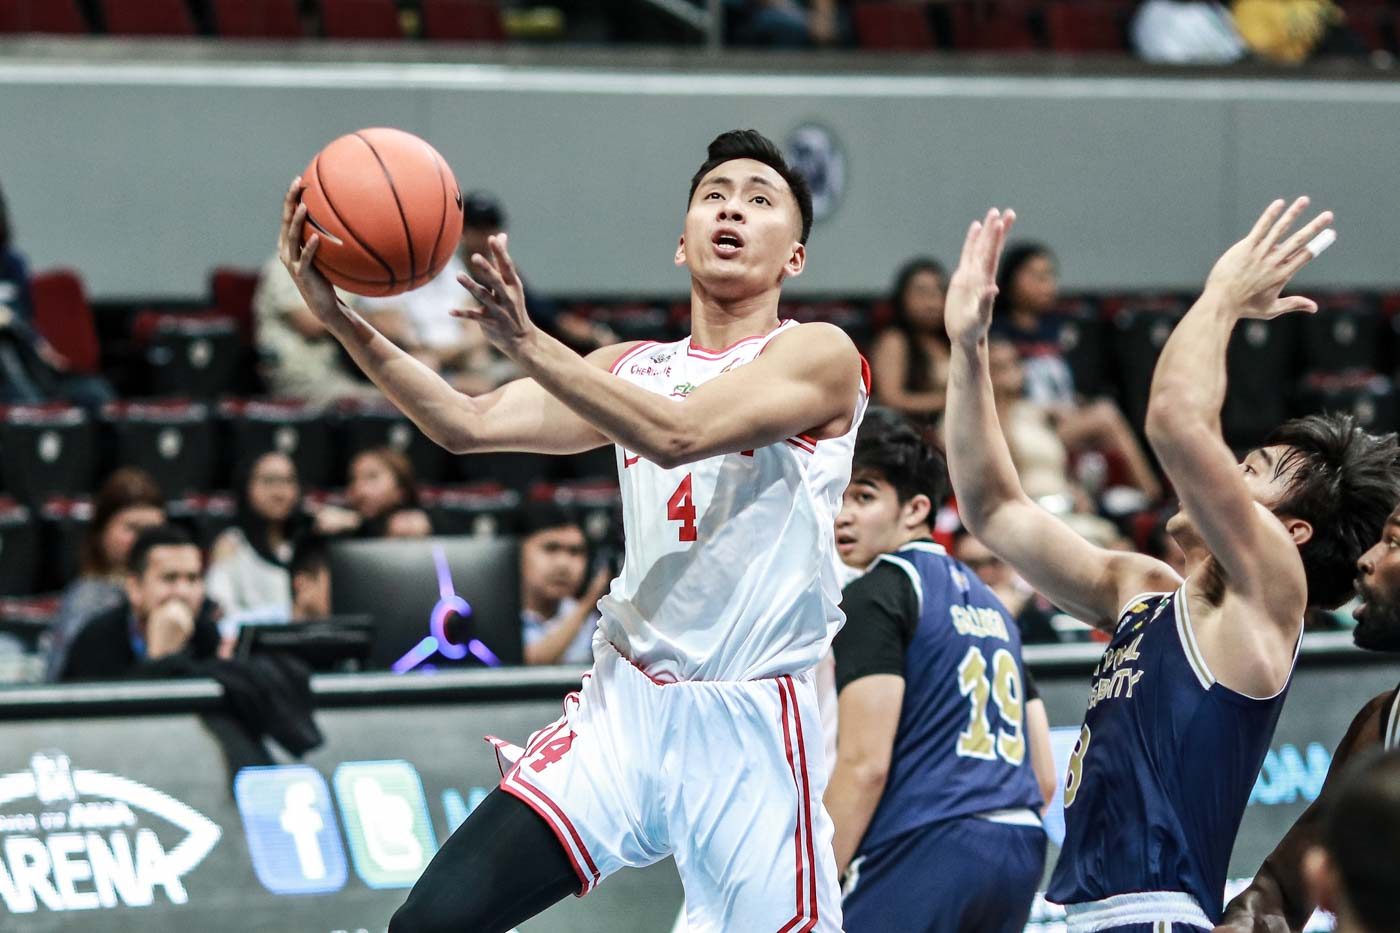 UE pushes NU to 10-year worst record